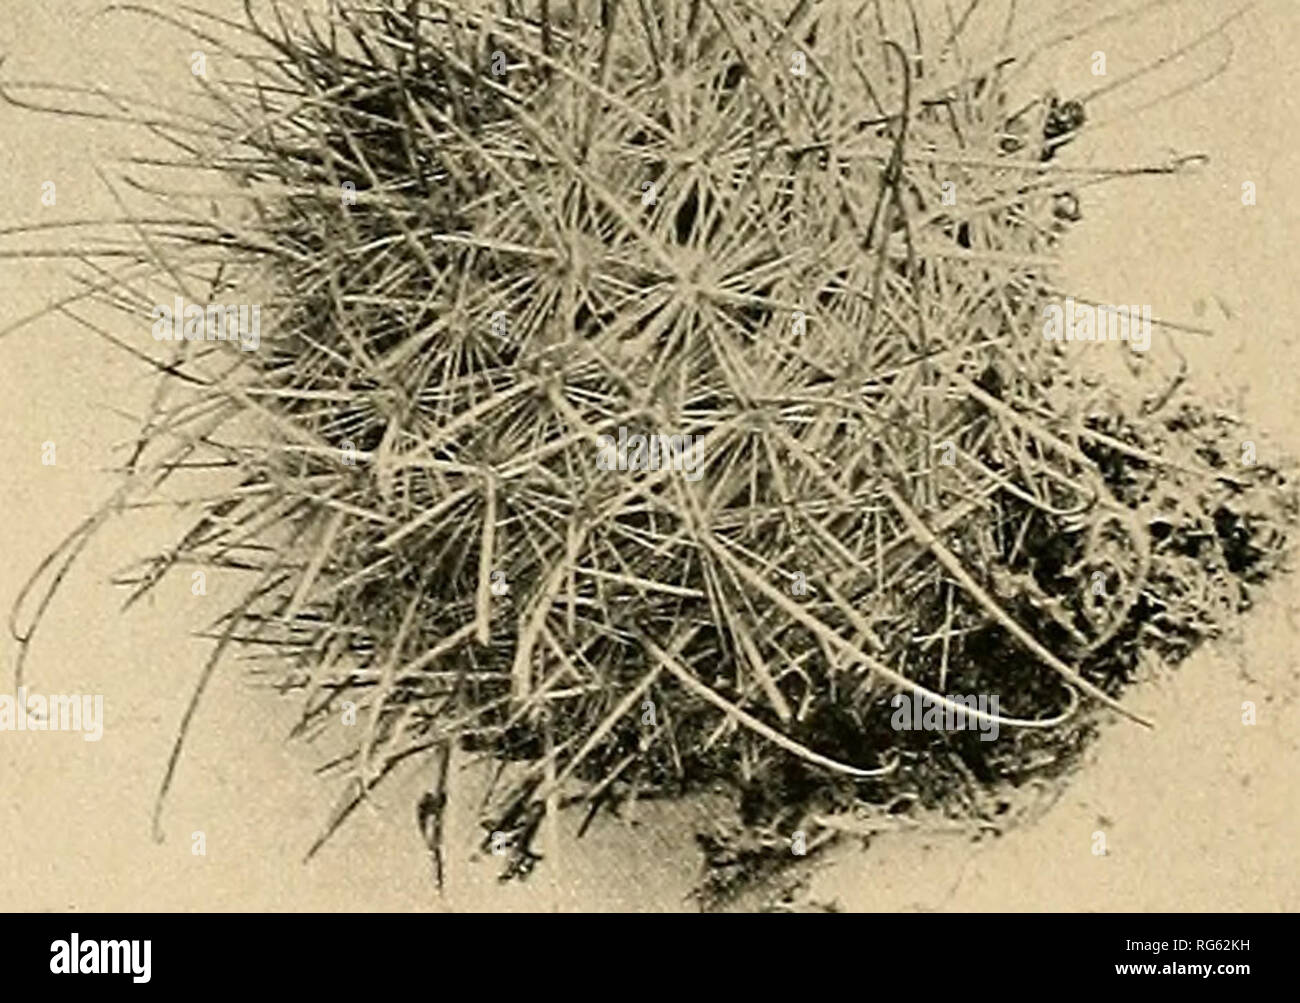 . The Cactaceae : descriptions and illustrations of plants of the cactus family. . Fig. 148.—Neomammillaria echinaria. 1 IG 149—e mamniill.ina rckoi Type locality: Mexico. Distribution: Hidalgo, Mexico. The above description is based on a plant collected by Dr. Rose in 1905 near Ixmi- quilpan, and this we have had growing ever since. The two varieties of Mammillaria echinata, gracilior Ehrenberg and pallida, published by Forster (Handb. Cact. 239. 1846), are probably only forms of the species. The varieties of Mammillaria gracilis may or may not belong here. They are as follows: var. laetevir Stock Photo